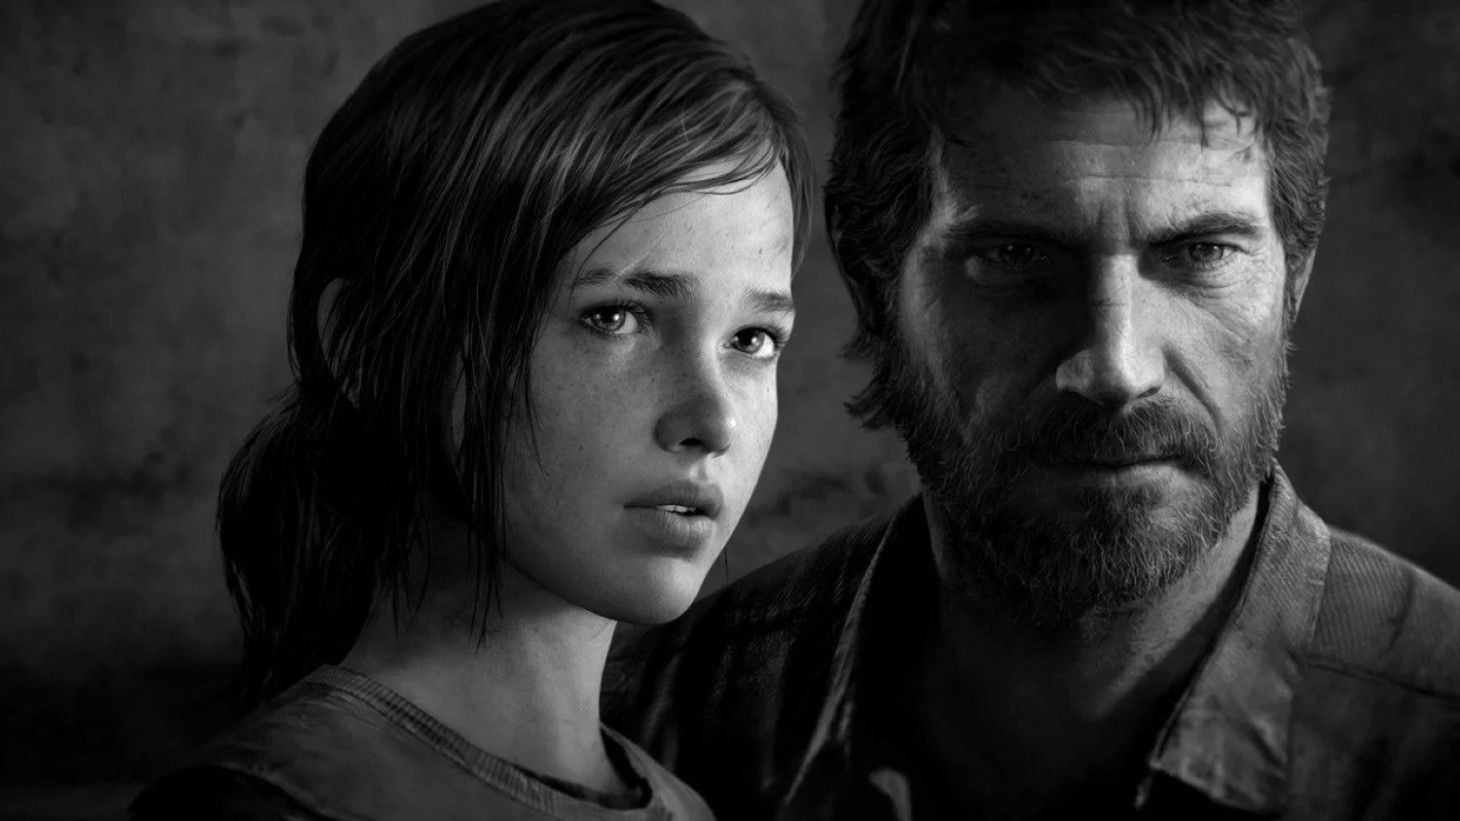 Is The Last of Us TV Series Faithful To The Game?